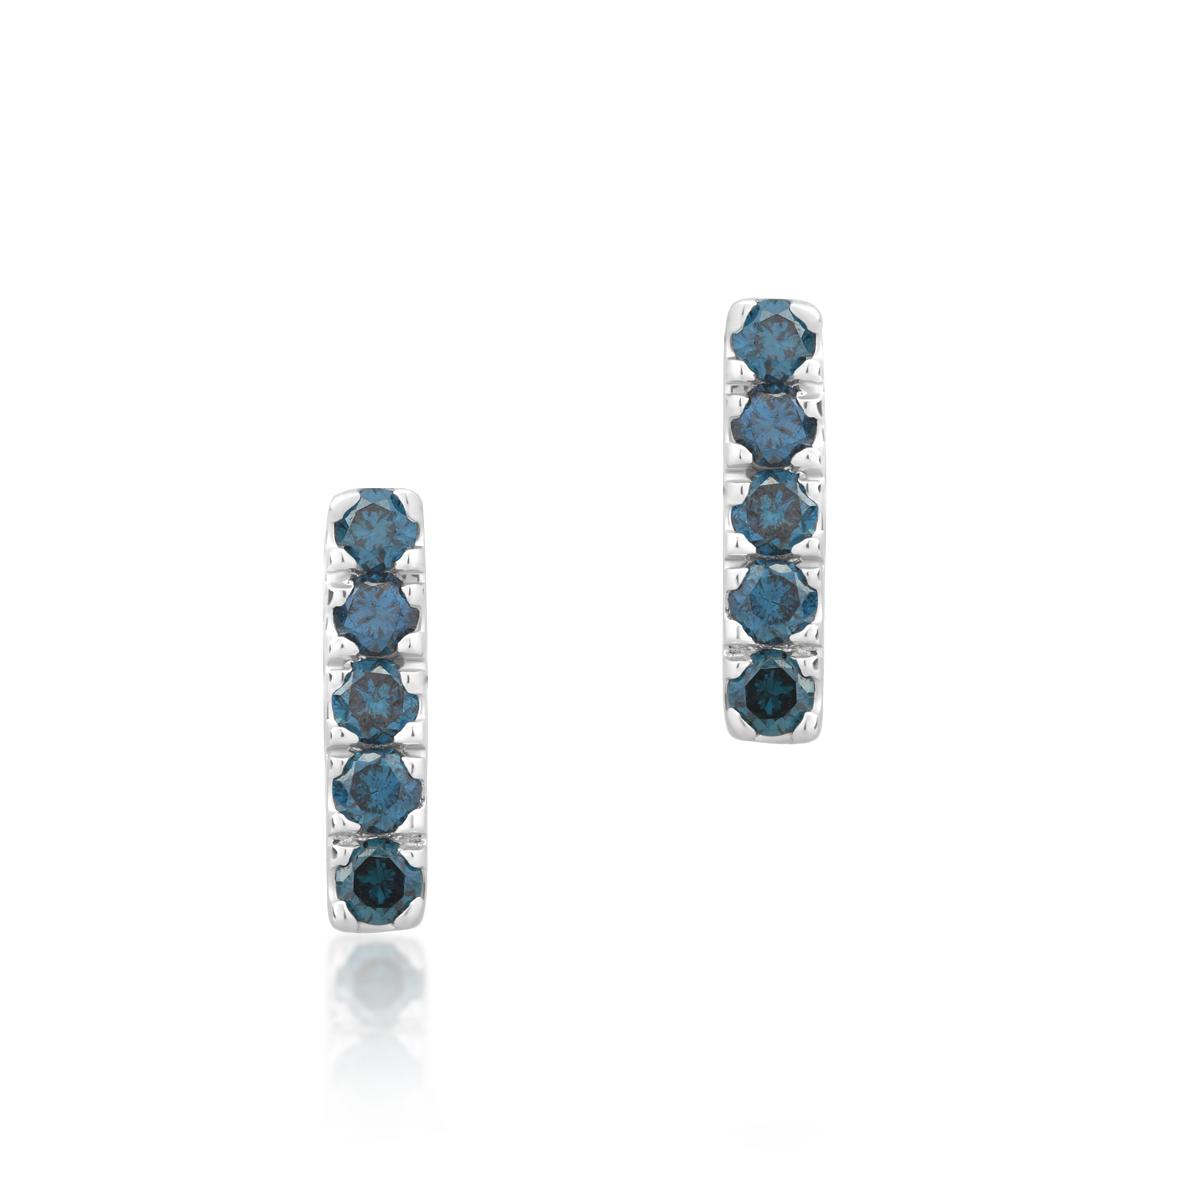 14K white gold earrings with sapphires of 0.25ct